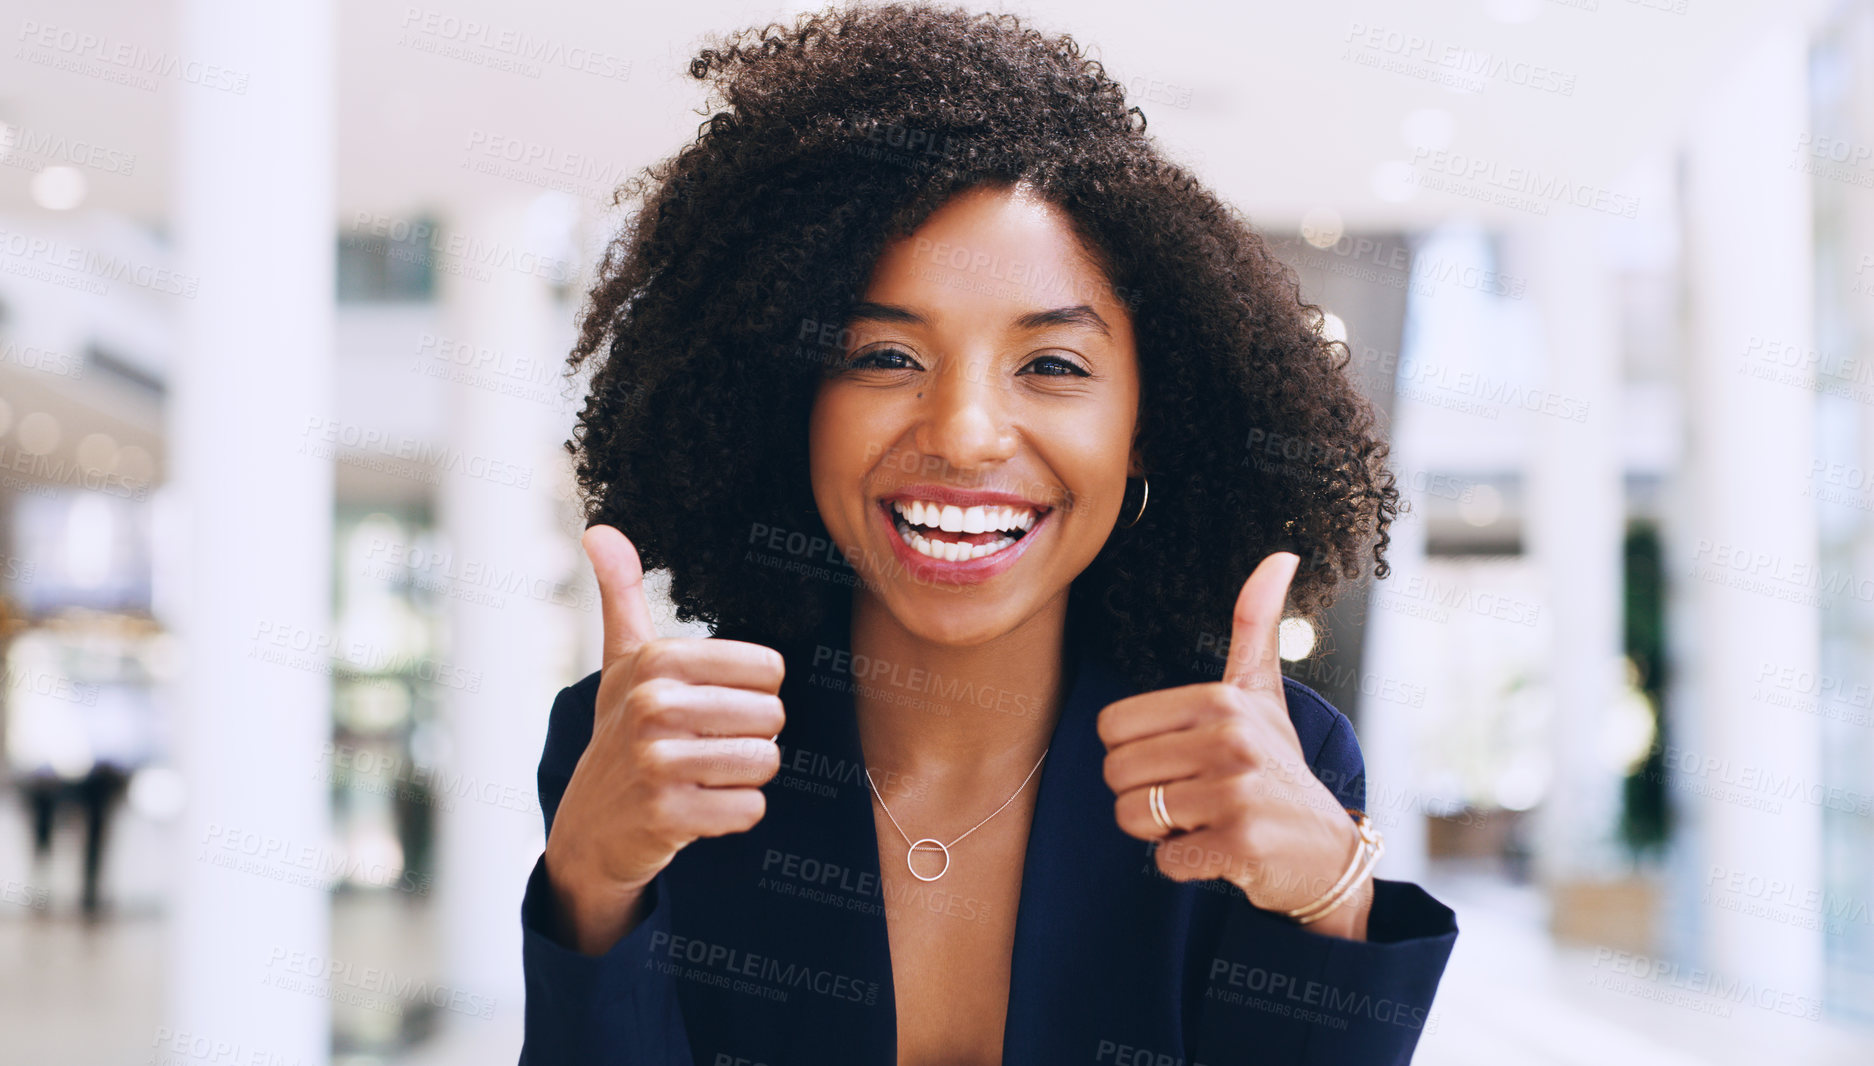 Buy stock photo Thumbs up, yes and happy business black woman doing thank you gesture, sign and excited for company success. African, goal and portrait of a corporate or professional employee in agreement with smile